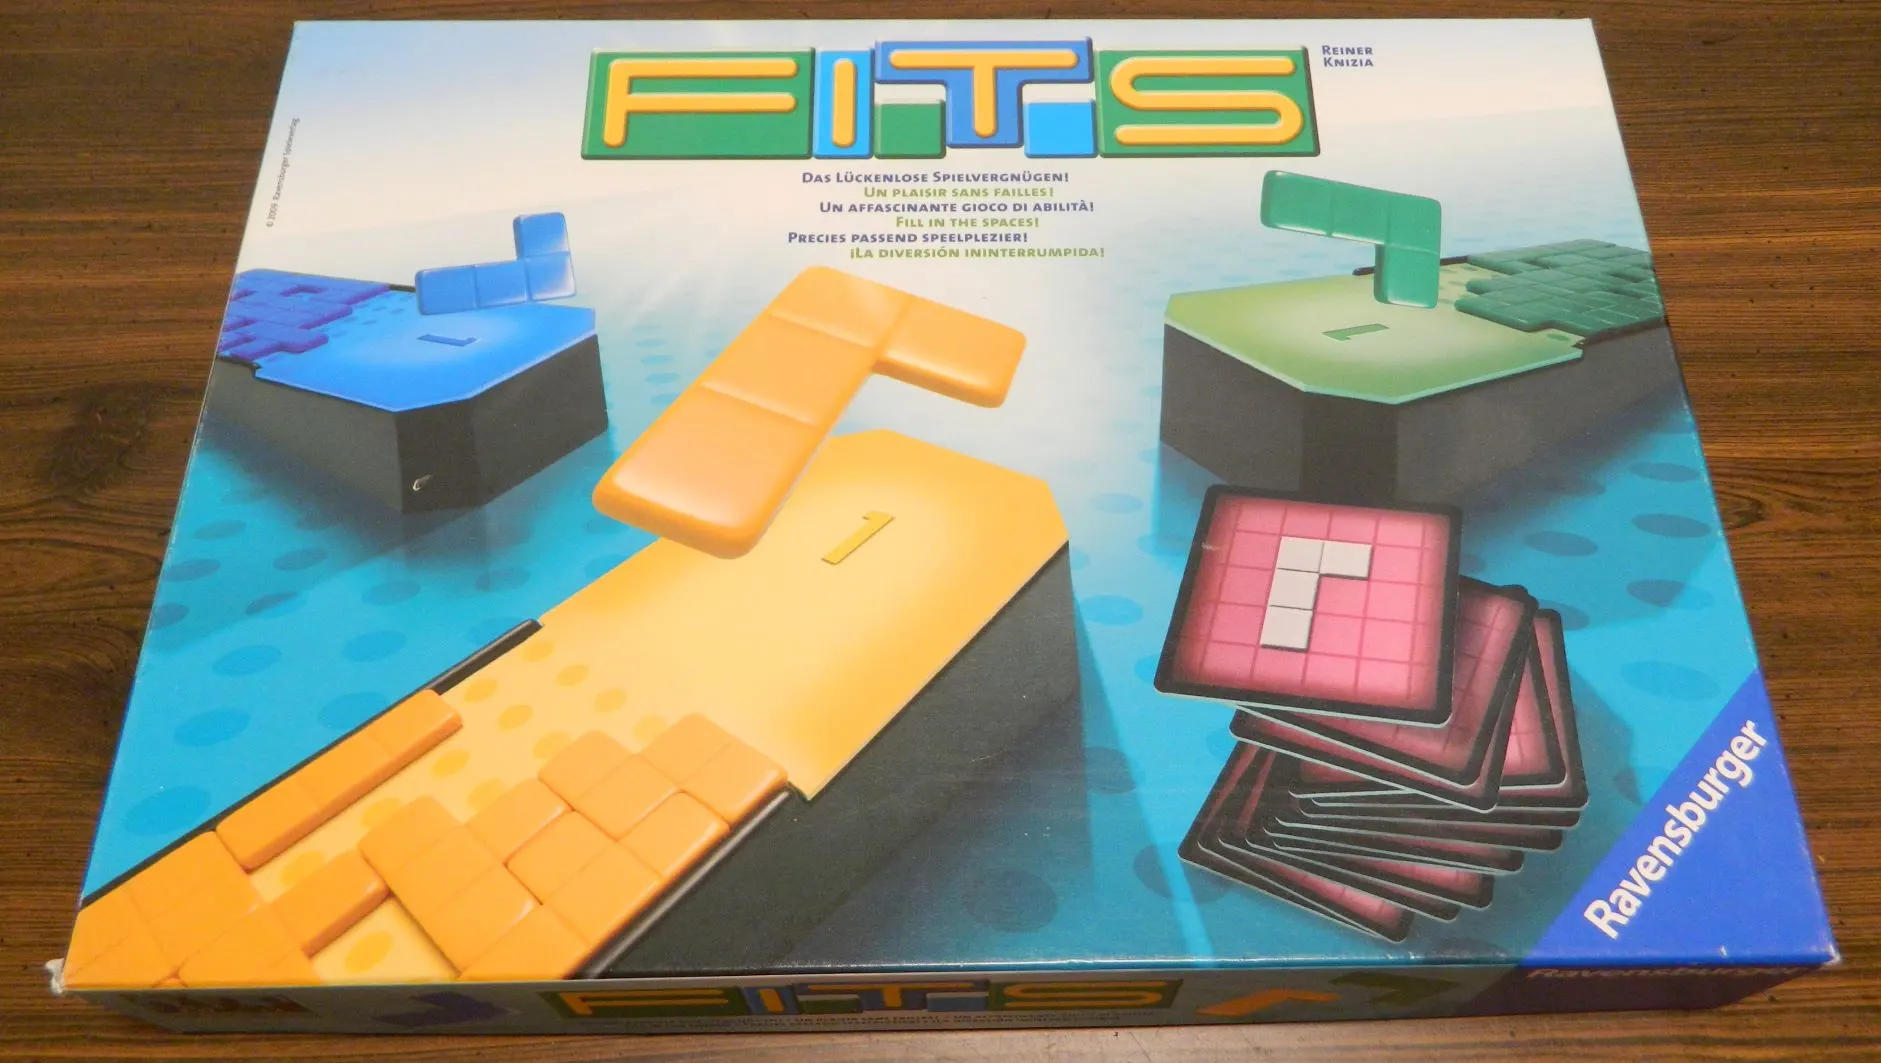 Box for Fits